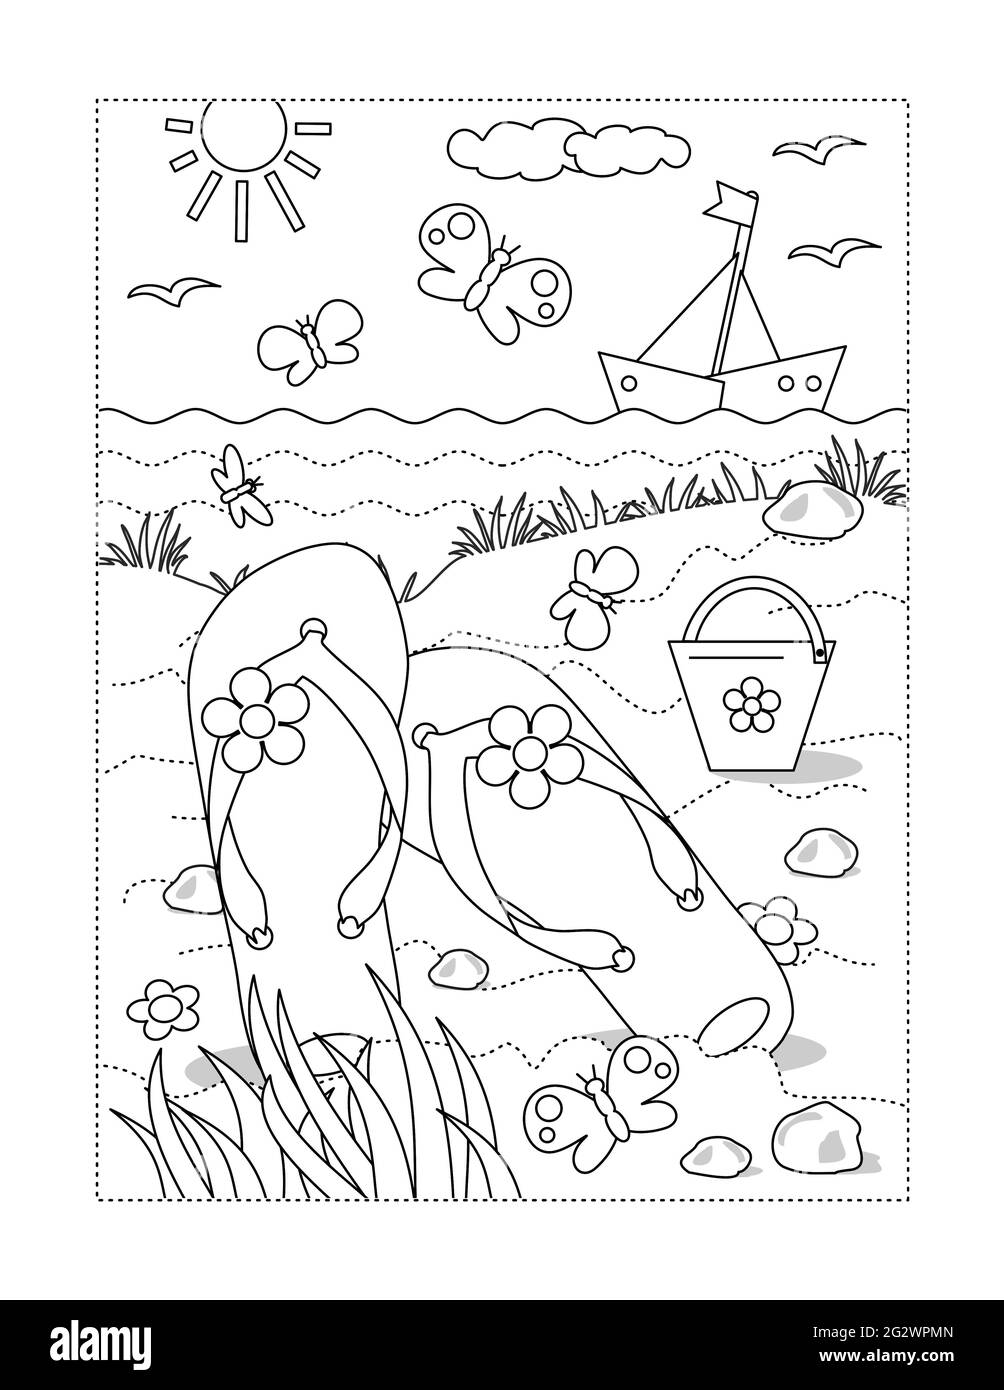 Coloring page with summer vacation scene - flip-flops, yacht, toy bucket at the beach Stock Photo